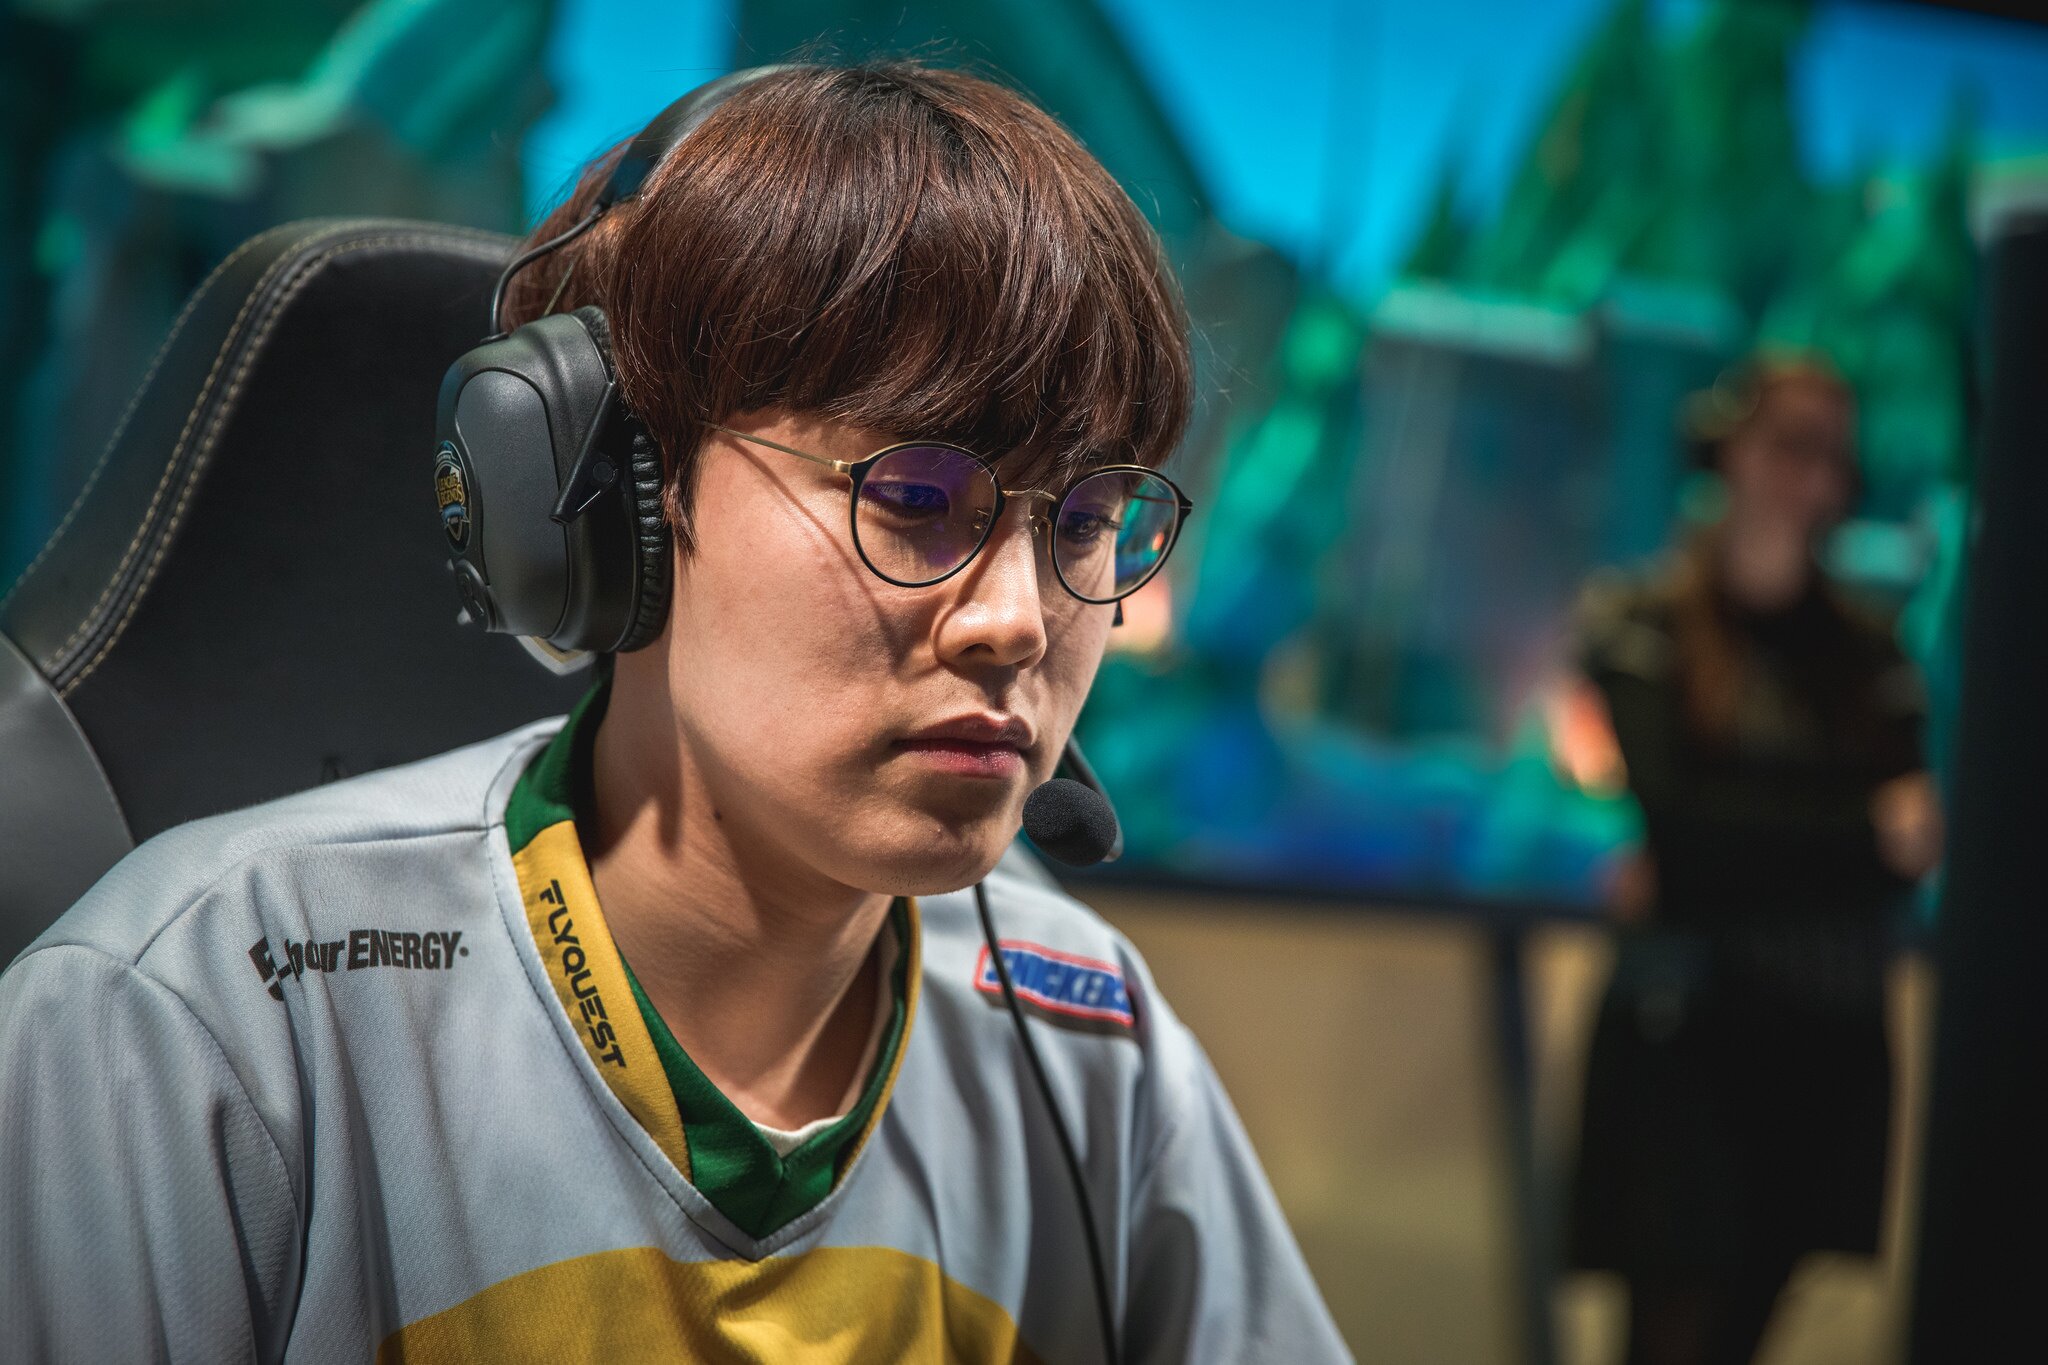 DAMWON Gaming seemed to be an odd fit for Flame. But we learned that his experience could become a key factor for the squad in the LCK.